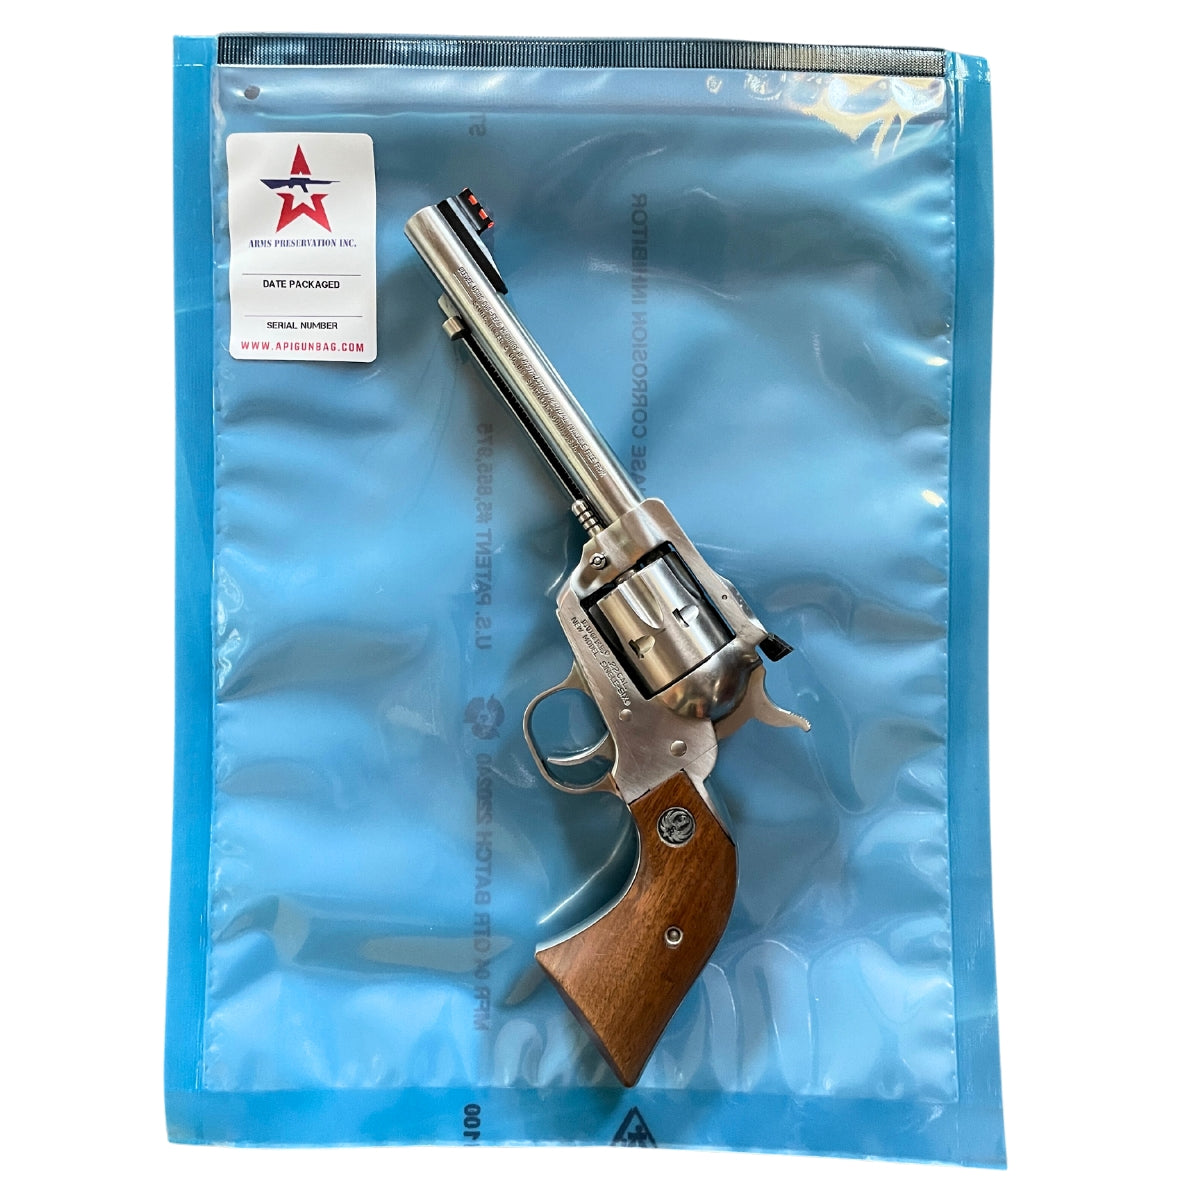 Arms Preservation Inc. VCI Anti Rust Firearm Storage Bags waterproof heat sealant weapons bags